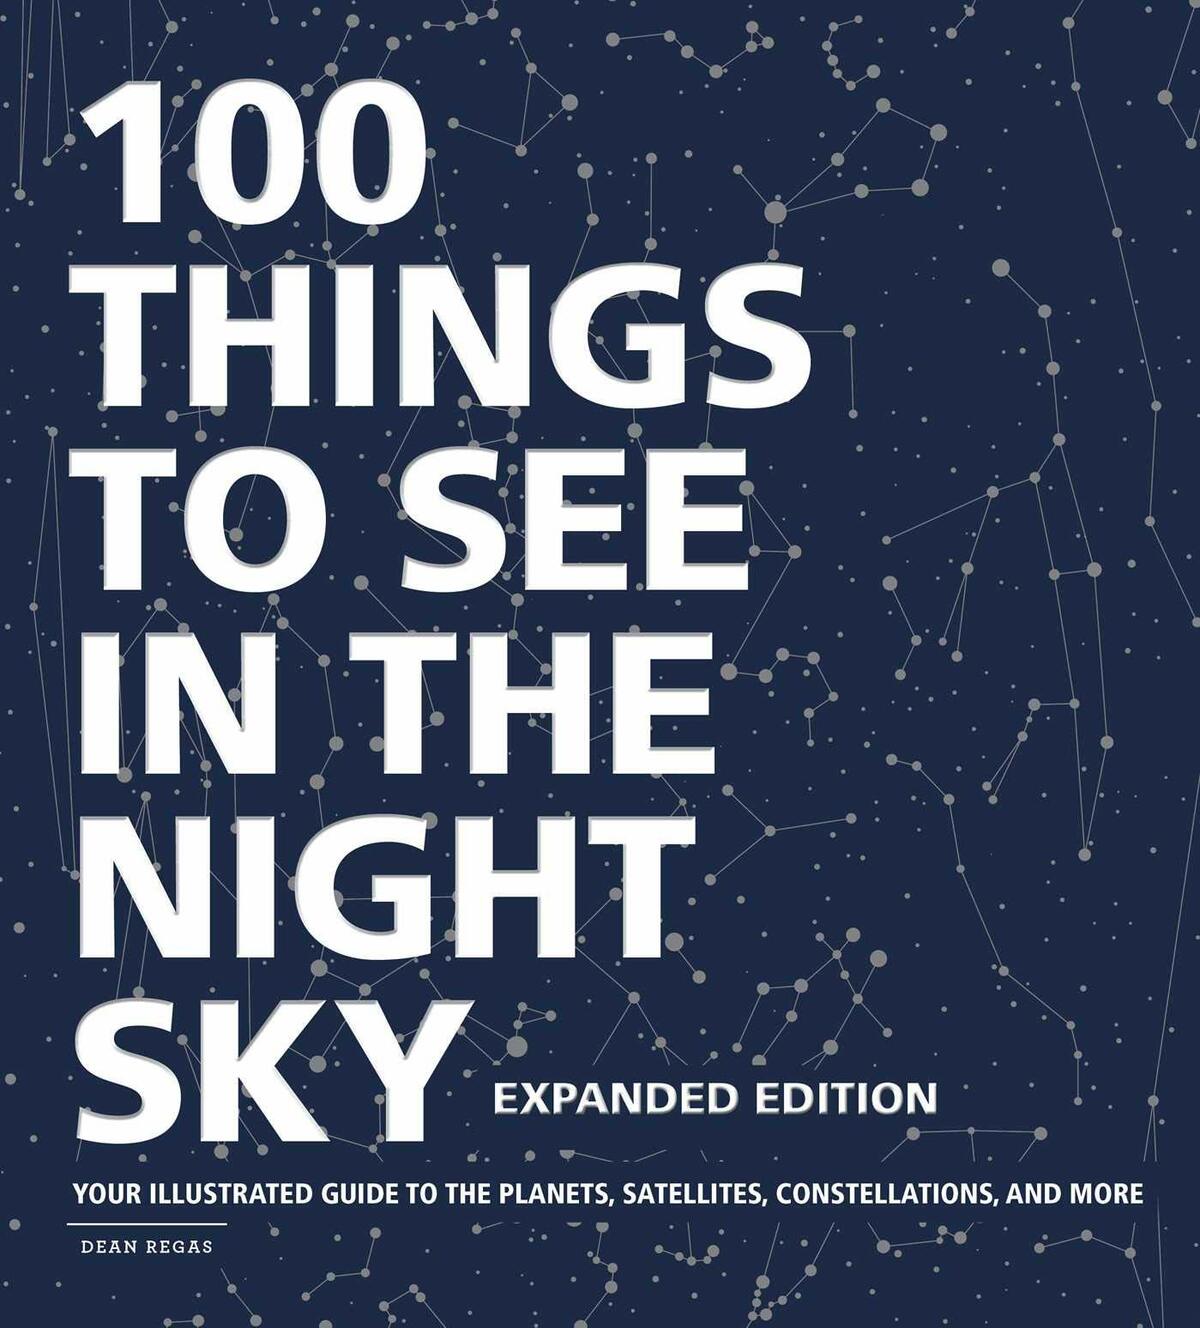 Book cover for "100 Things to See in the Night Sky"